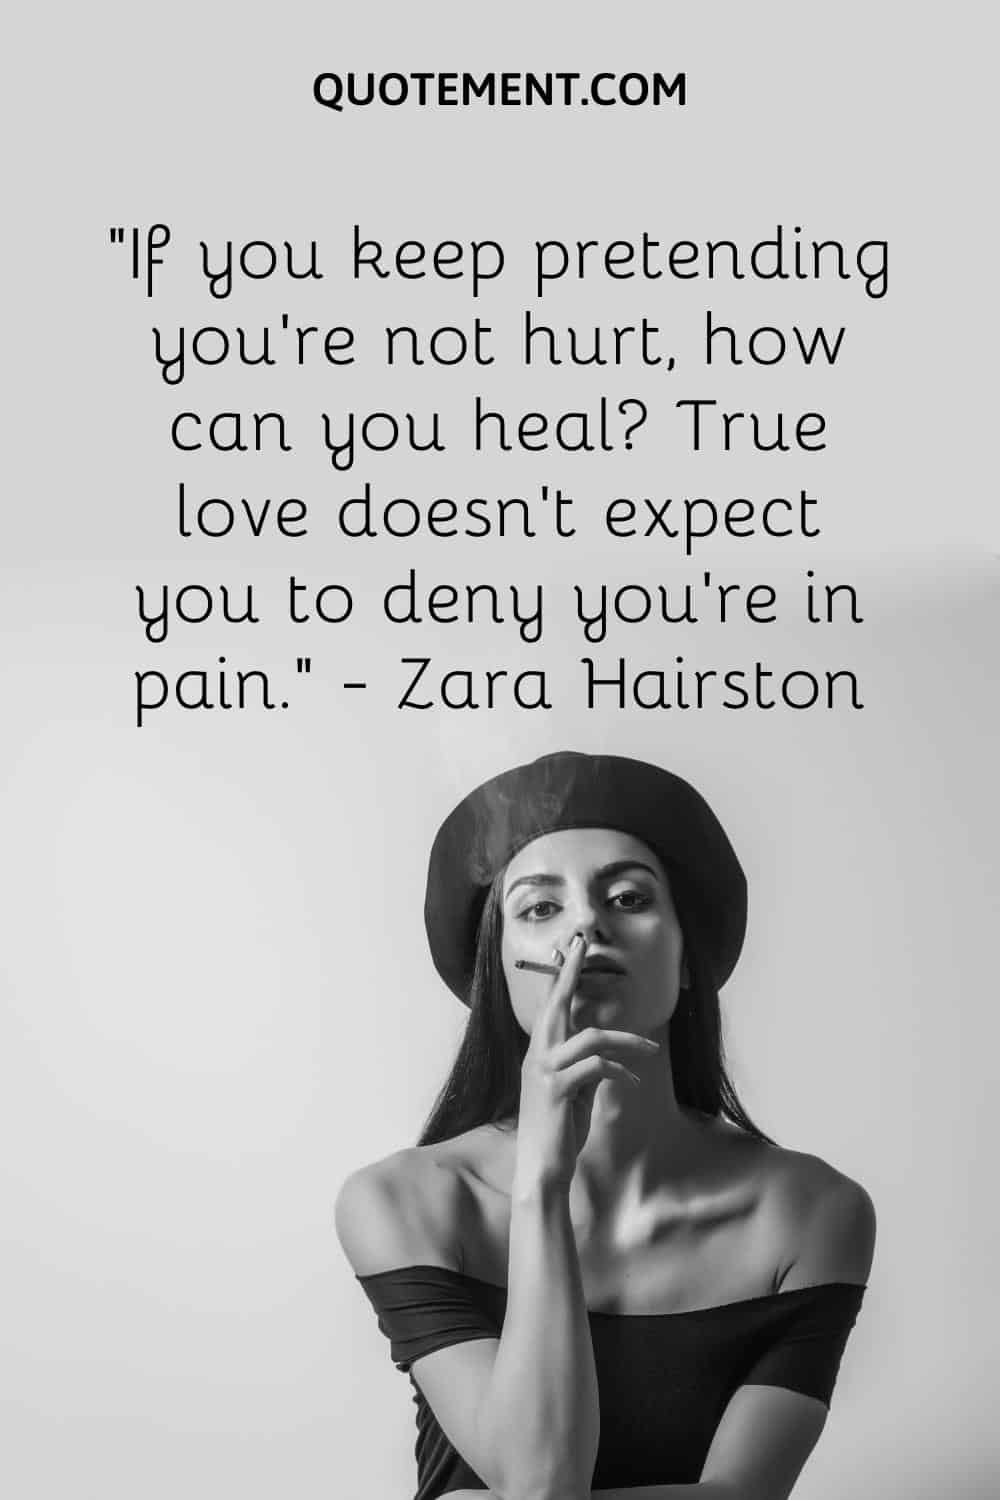 If you keep pretending you’re not hurt, how can you heal